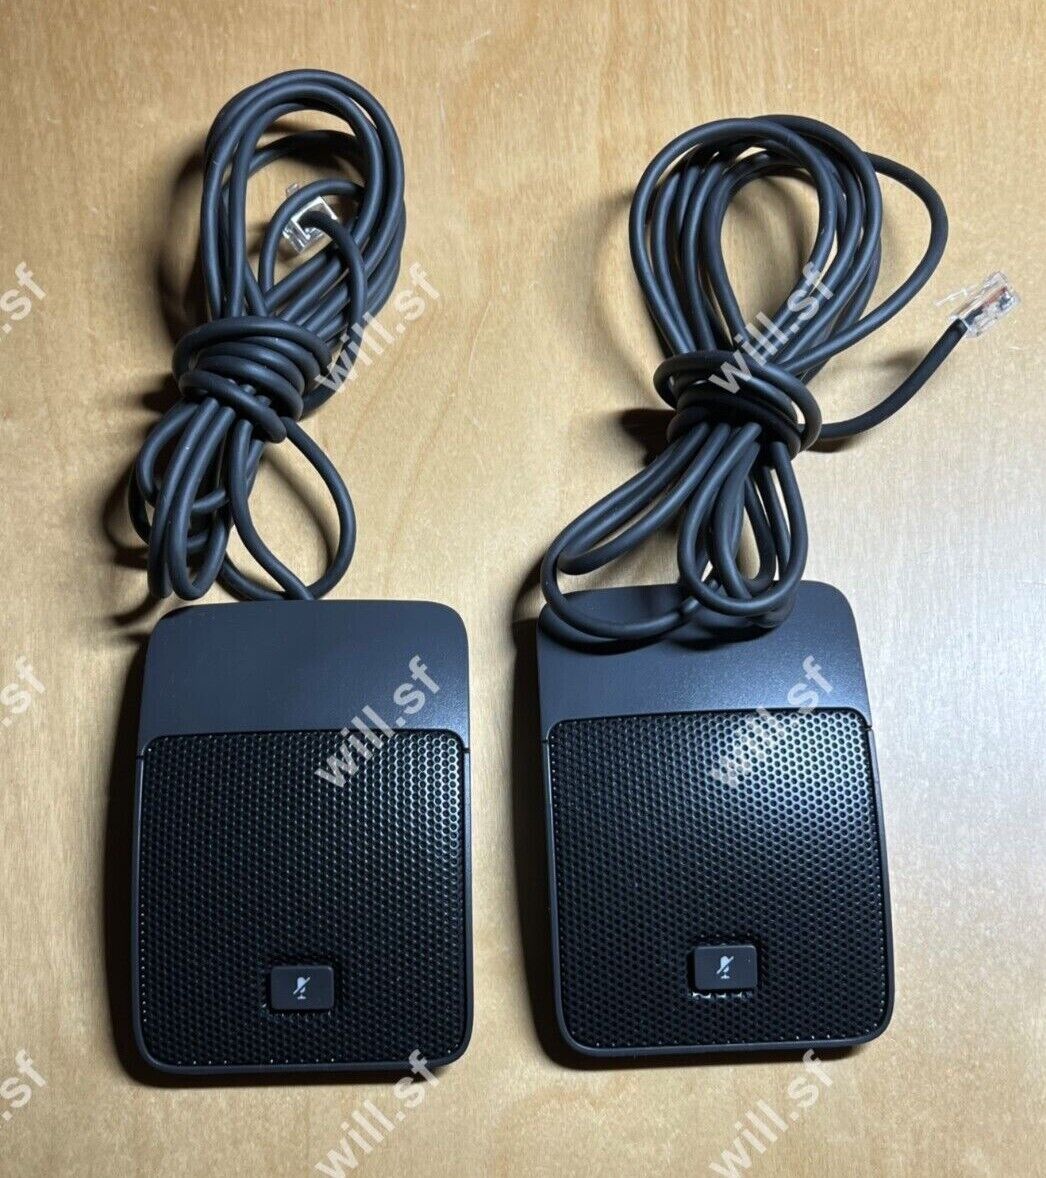 Lot of 2 - Genuine Cisco Wired Microphones CP-MIC-WIRED-S for CP-8831 Phone VoIP